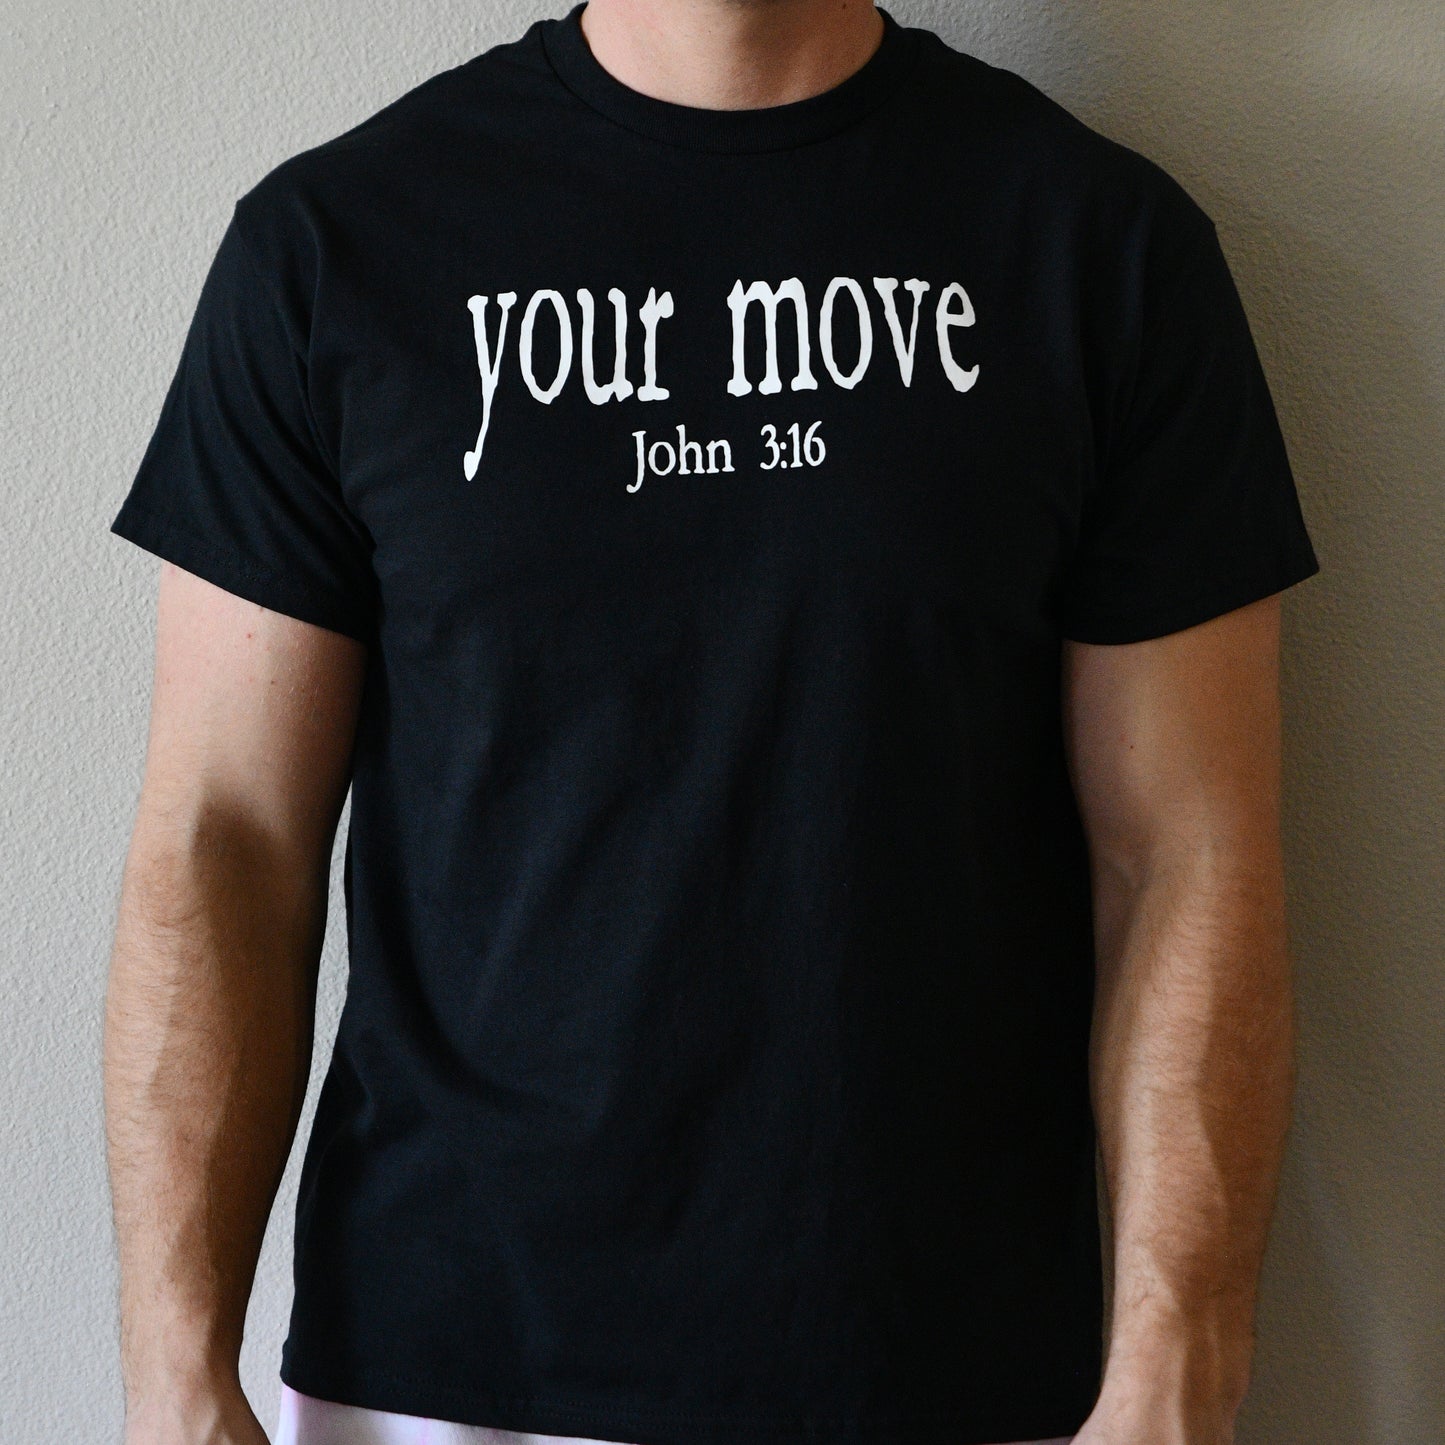 Your Move - John 3:16 - 5 Sizes, 4 Colors Available